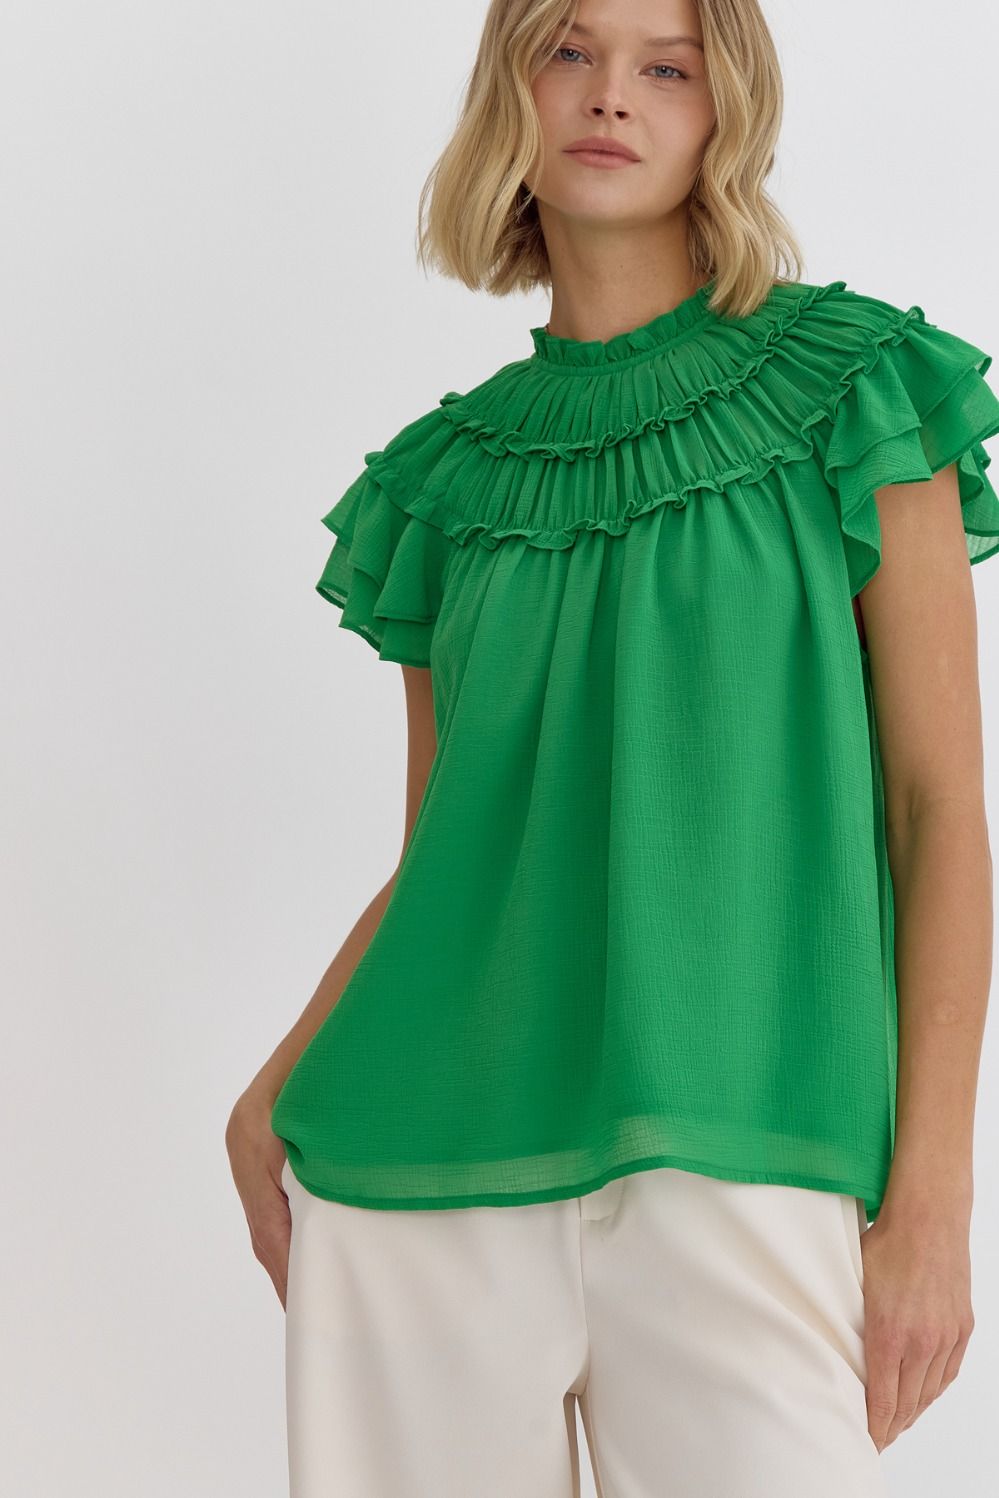 ENTRO INC Women's Top GREEN / S Pleated Ruffle Short Sleeve Top || David's Clothing T23160